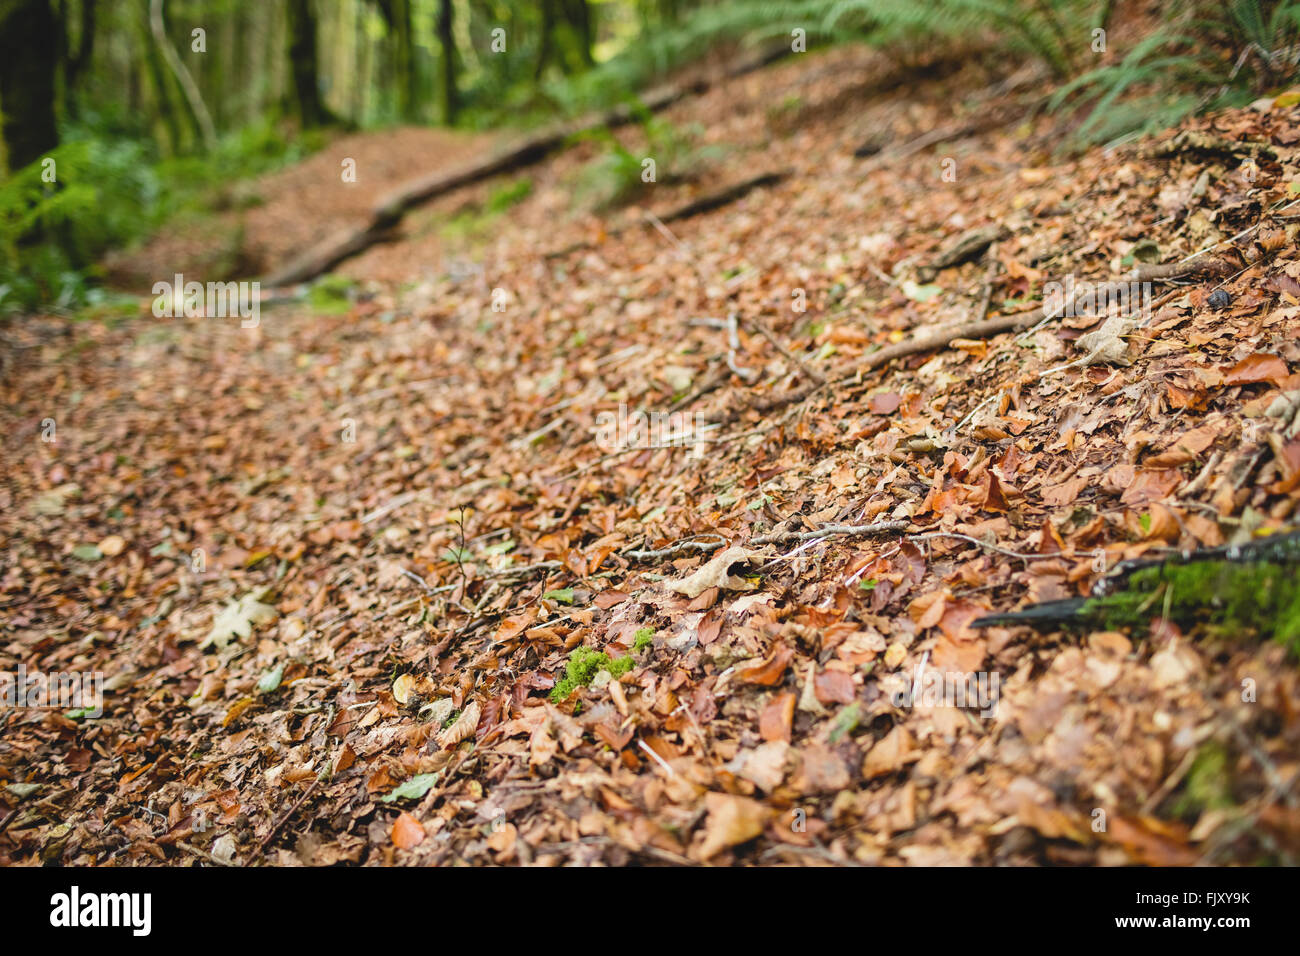 A view of dead leaves in a forest Stock Photo